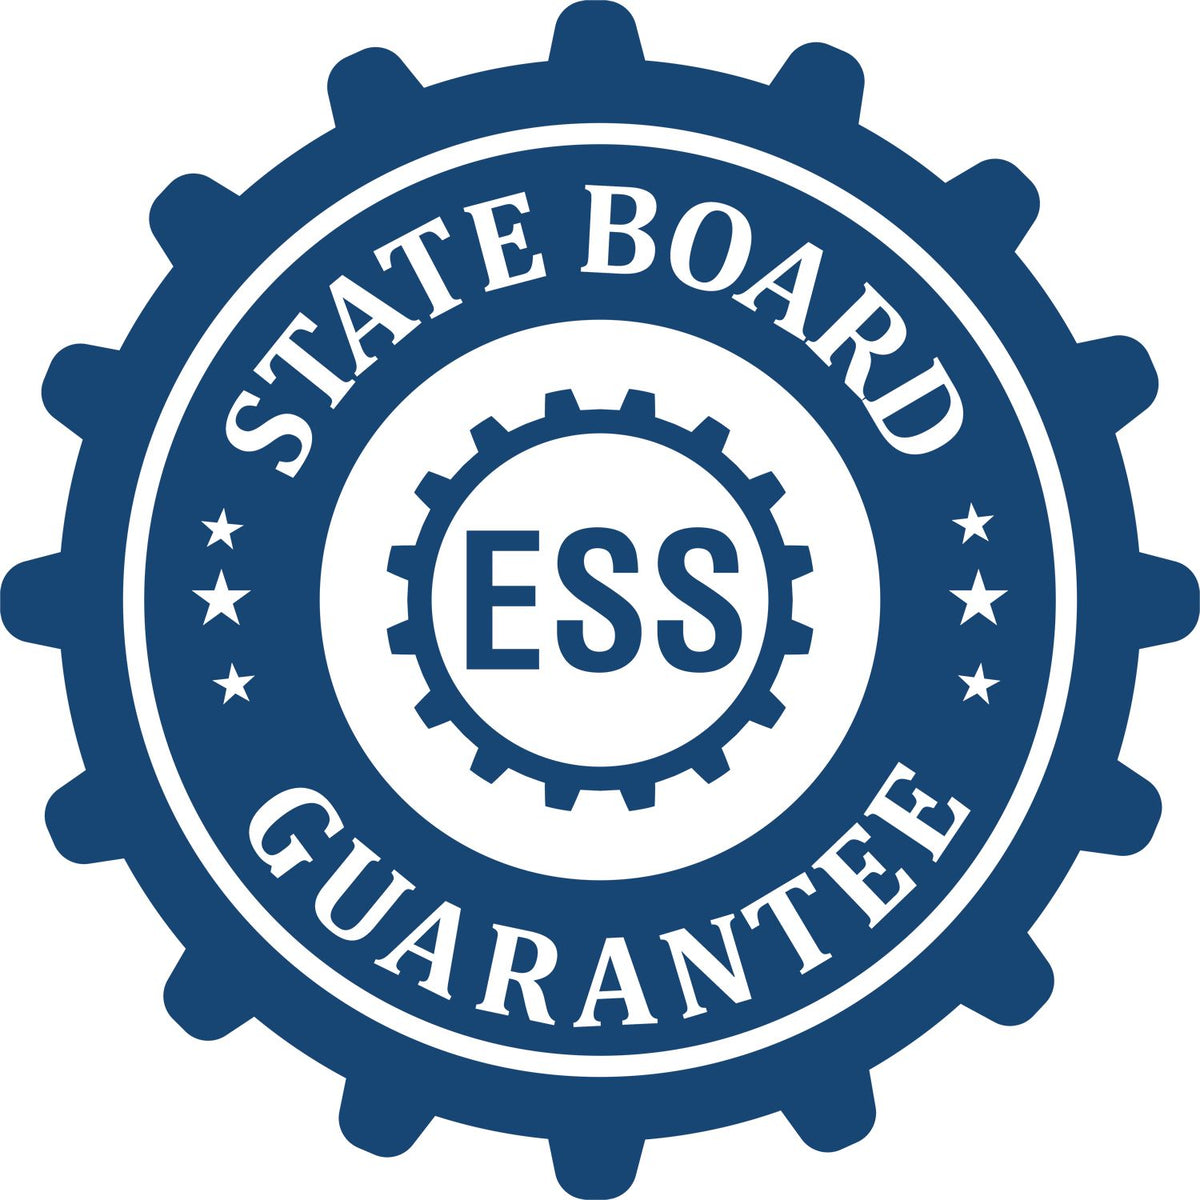 An emblem in a gear shape illustrating a state board guarantee for the Wooden Handle Vermont State Seal Notary Public Stamp product.